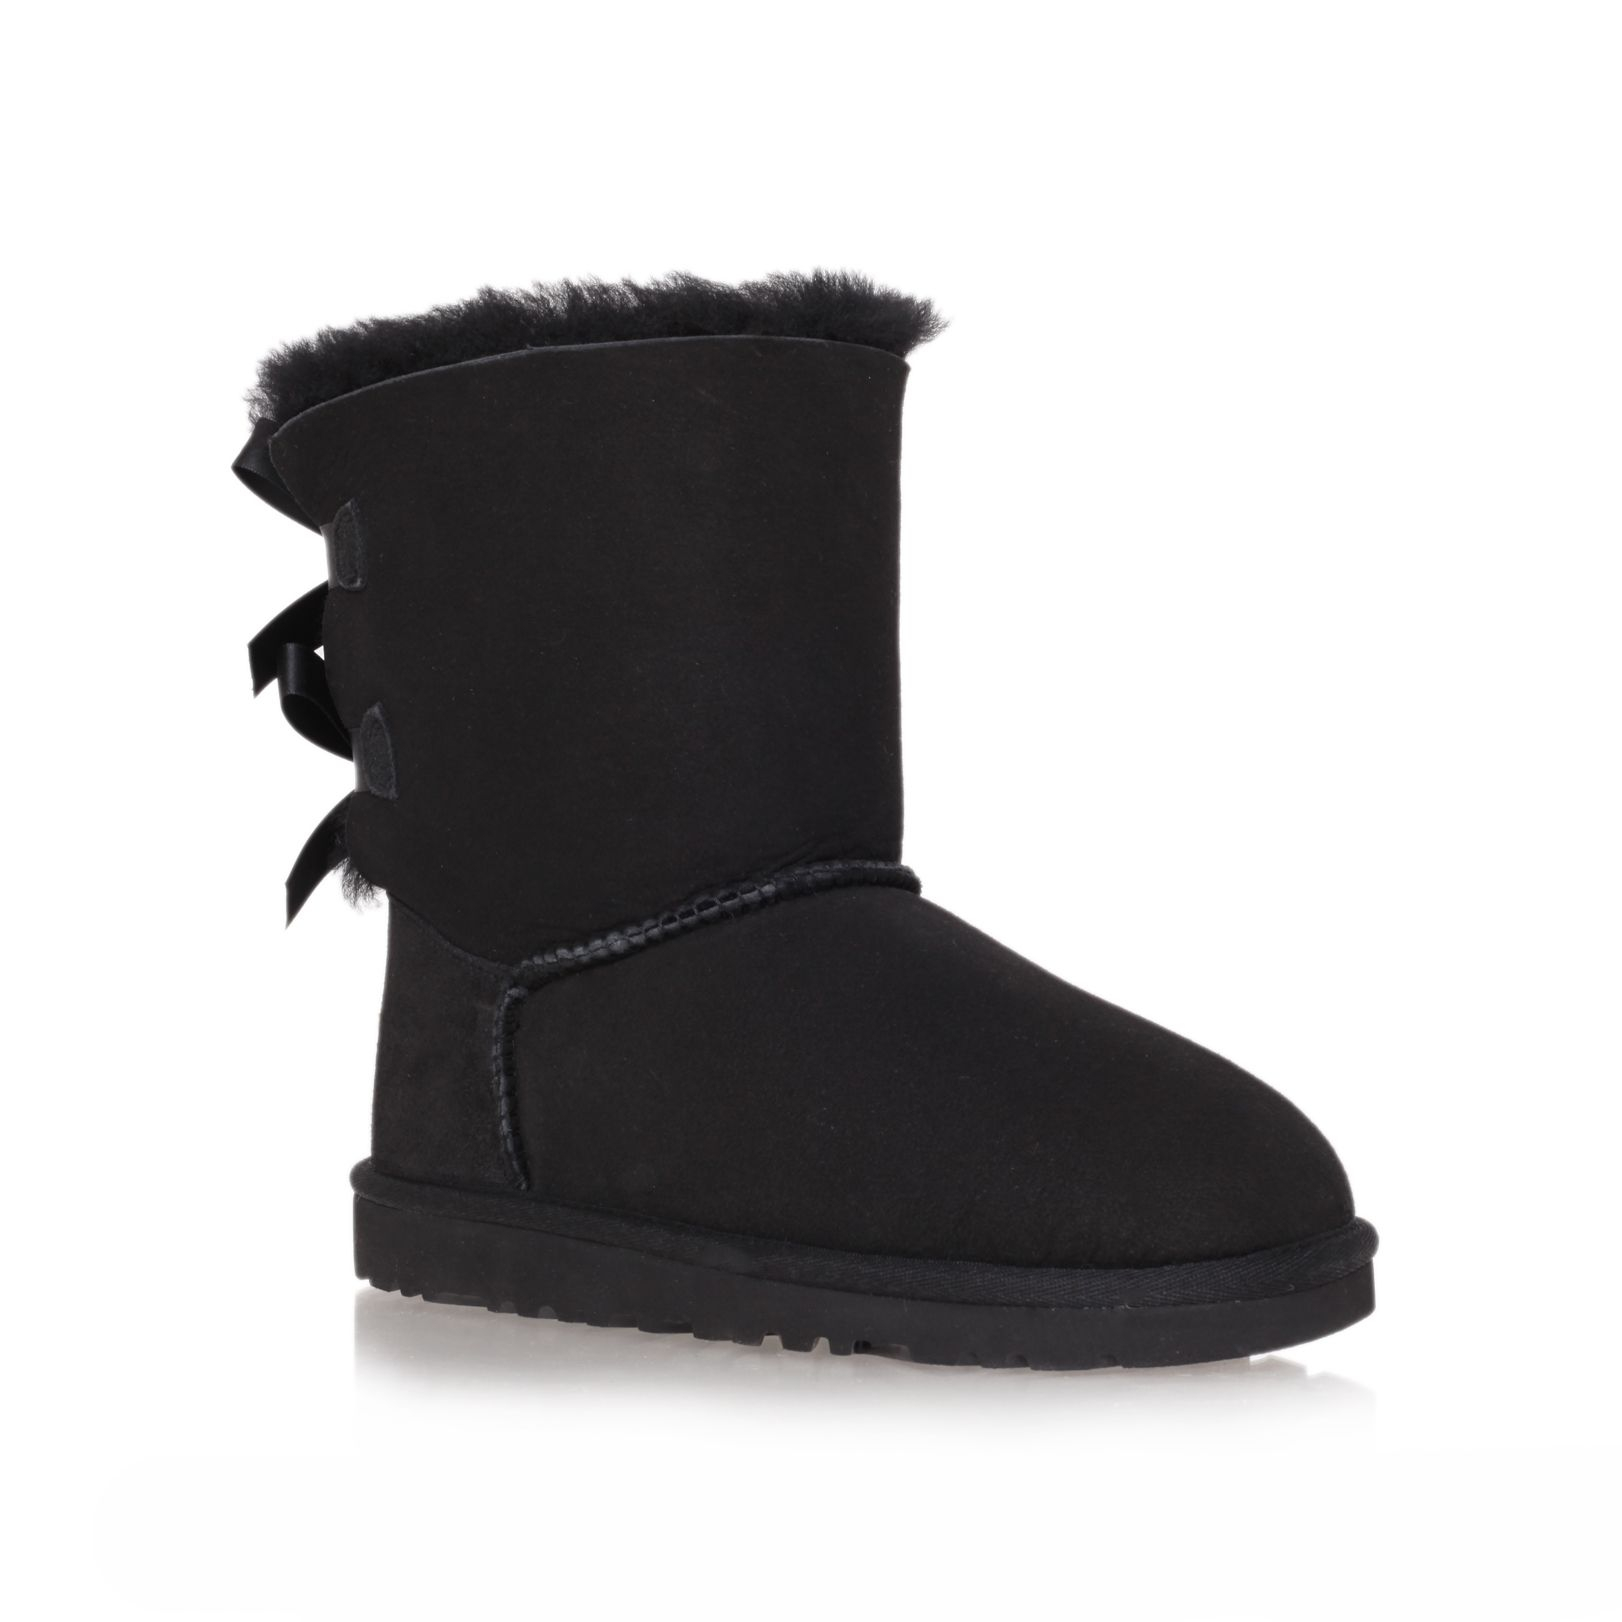 UGG Bailey Bow 1002954 Black Boots